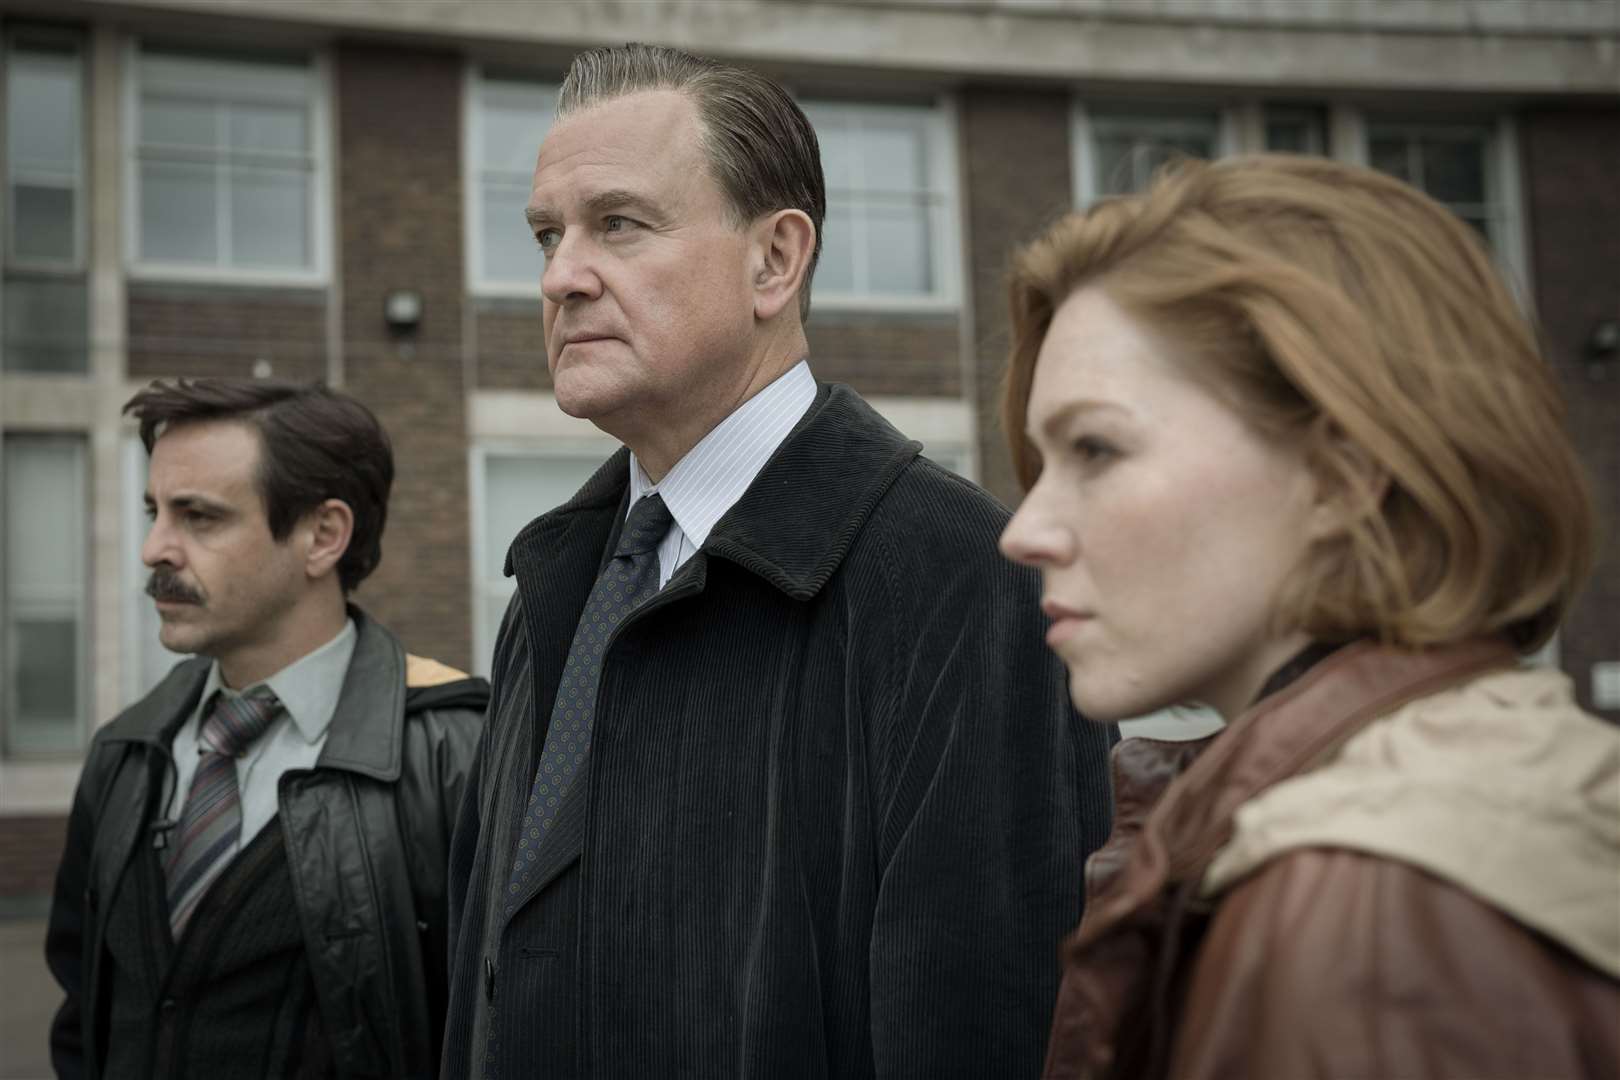 DCI Brian Boyce (Hugh Bonneville) with detectives Nikki Jennings (Charlotte Cooper) and Tony Brightwell (Emun Elliot) who chased the smelted Picture: Tannadice Pictures